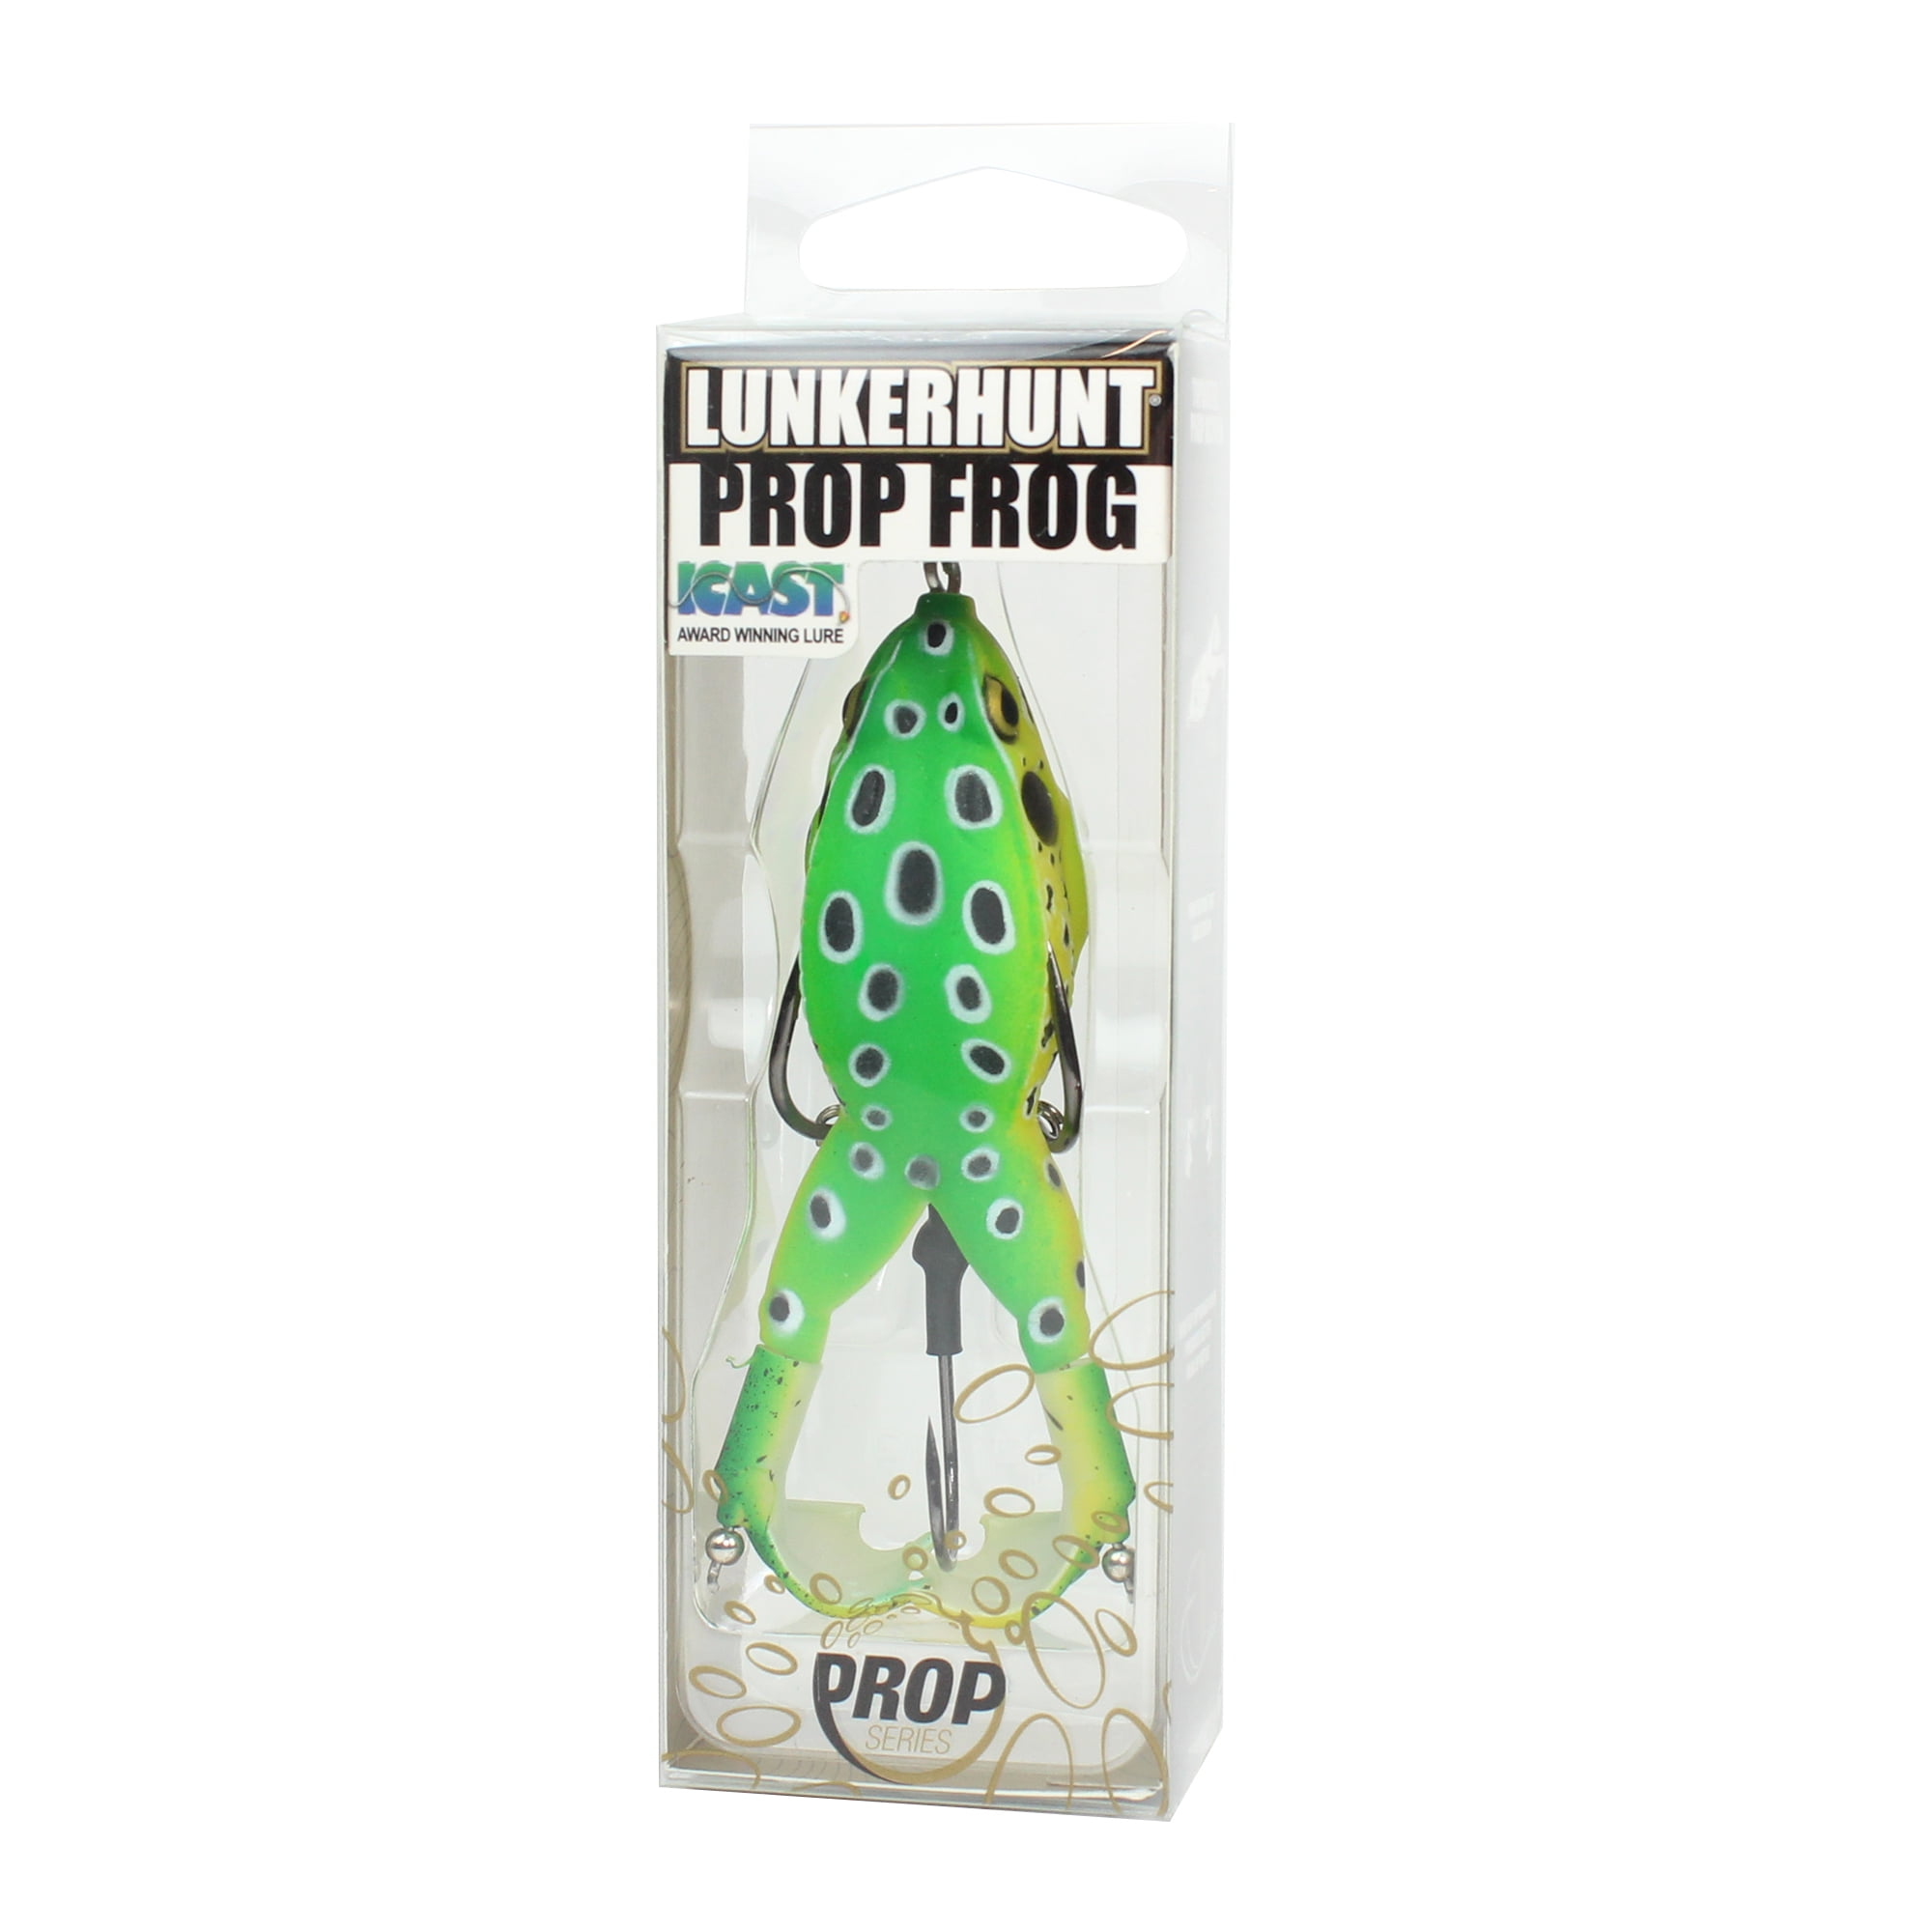 Lunkerhunt Prop Frog - Topwater Lure - Leopard,3.5in,1/2oz,Soft  Baits,Fishing Lures 